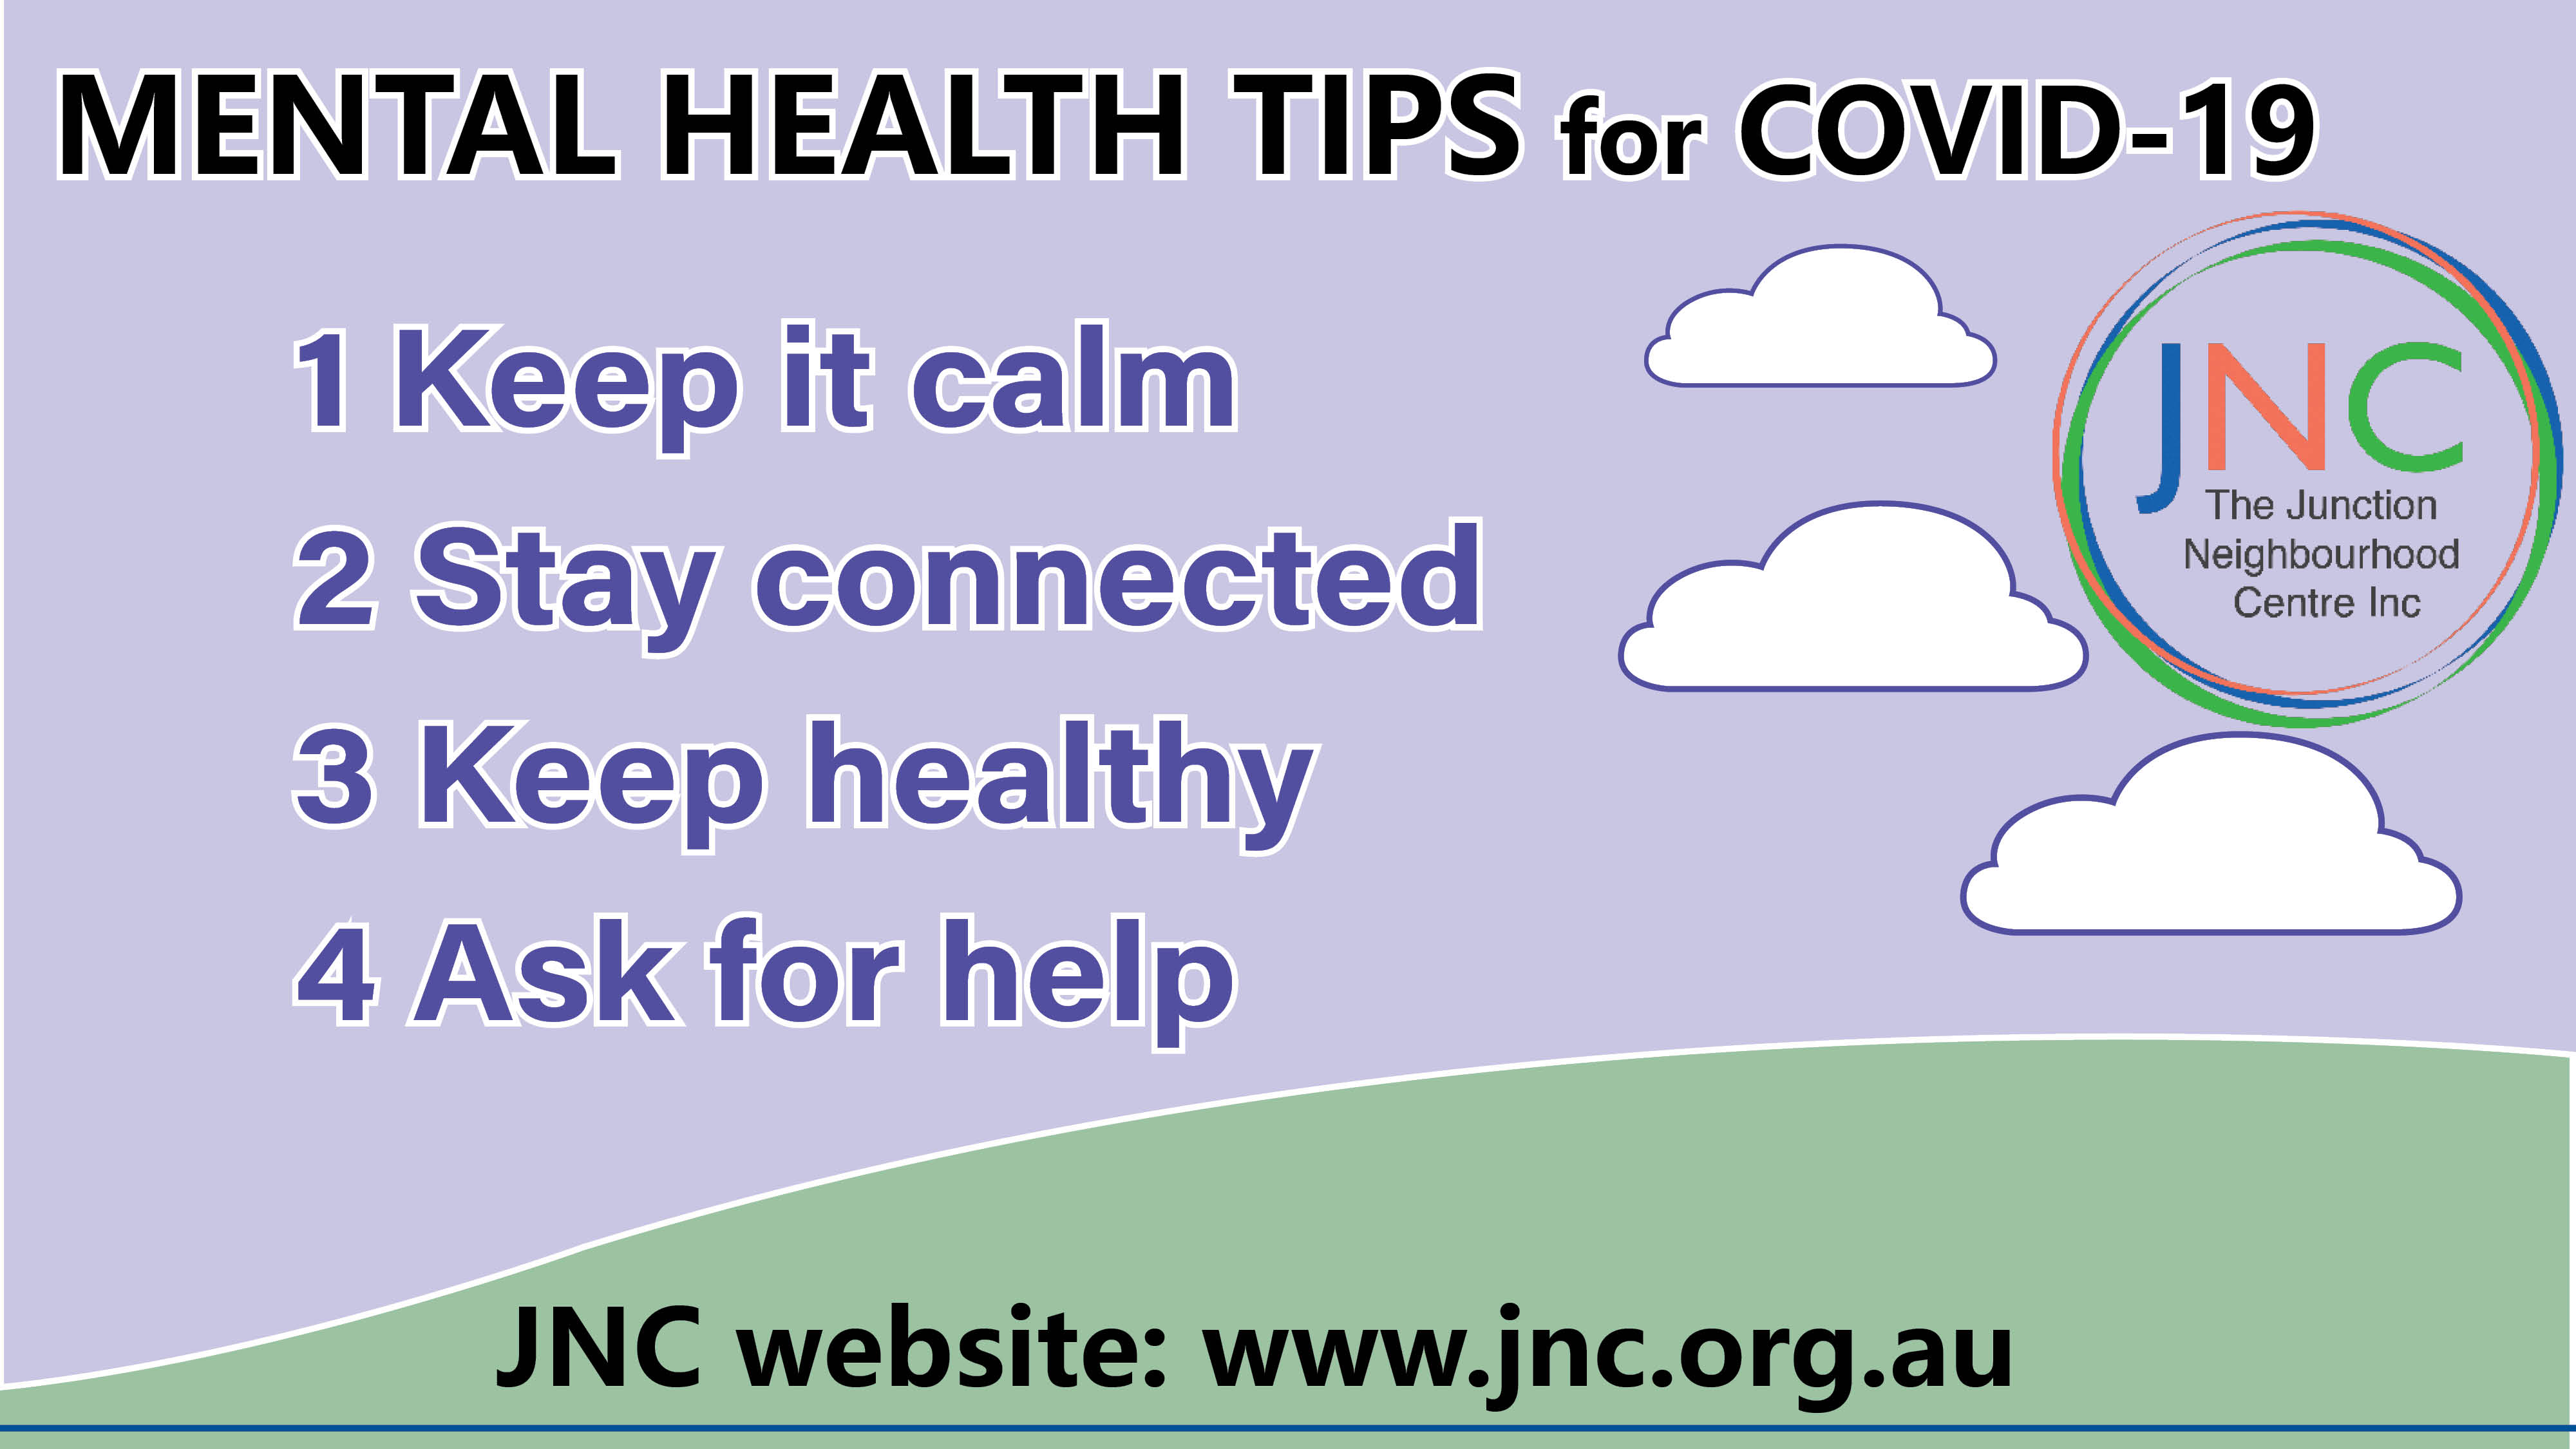 poster with JNC's mental health tips for COVID-19